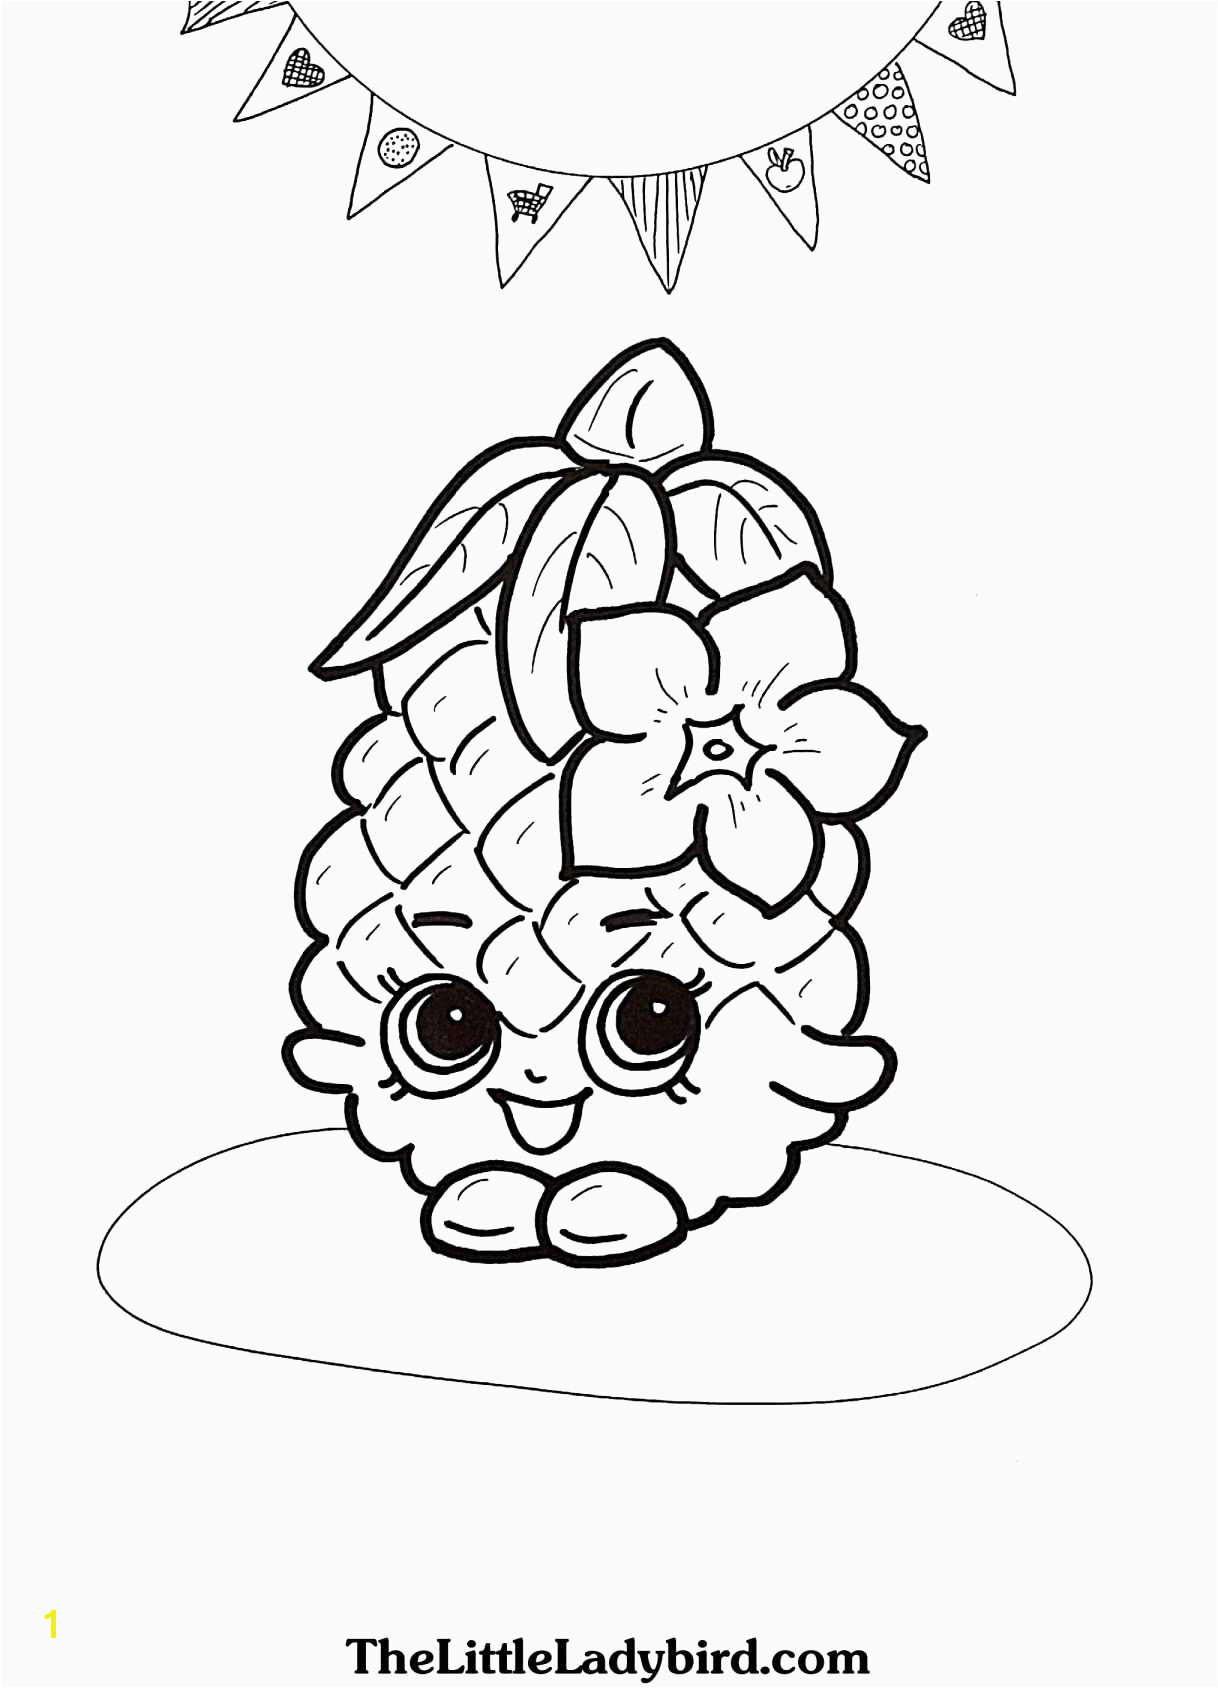 Printable Bakugan Coloring Pages Free Coloring Sheets for Girls Cool Anime Coloring Pages Lovely Printable